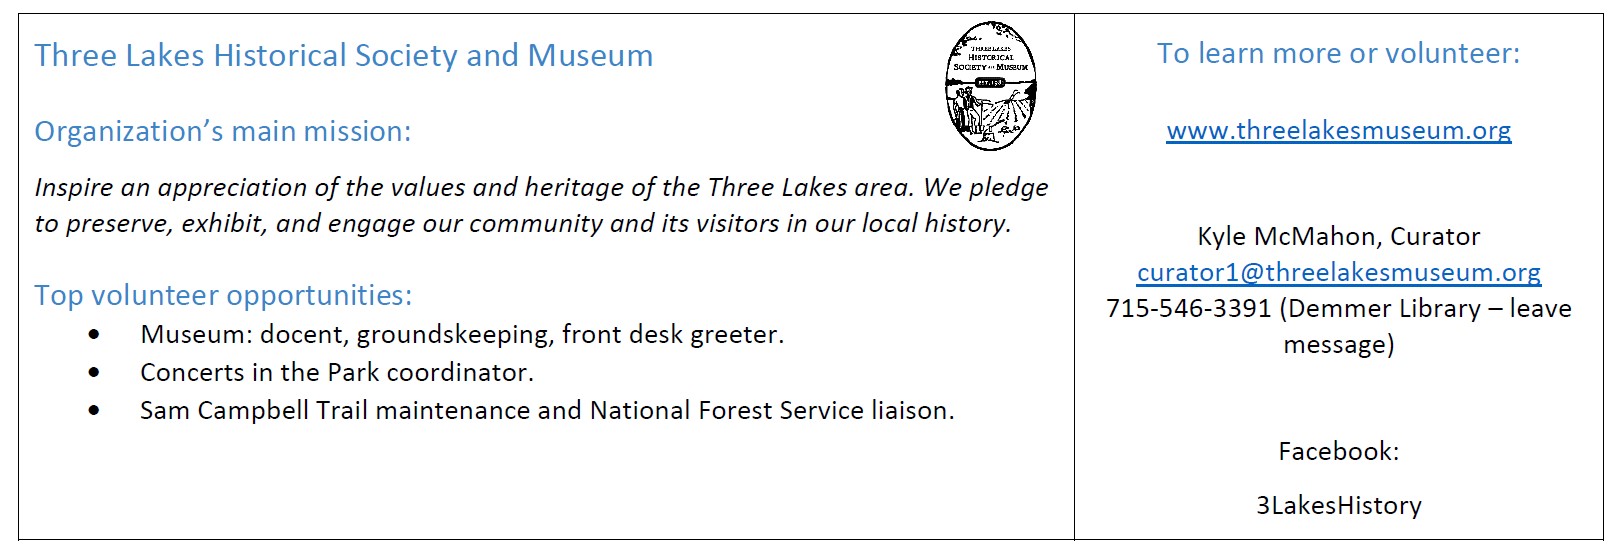 Volunteer opportunities at the Three Lakes Historical Society and Museum